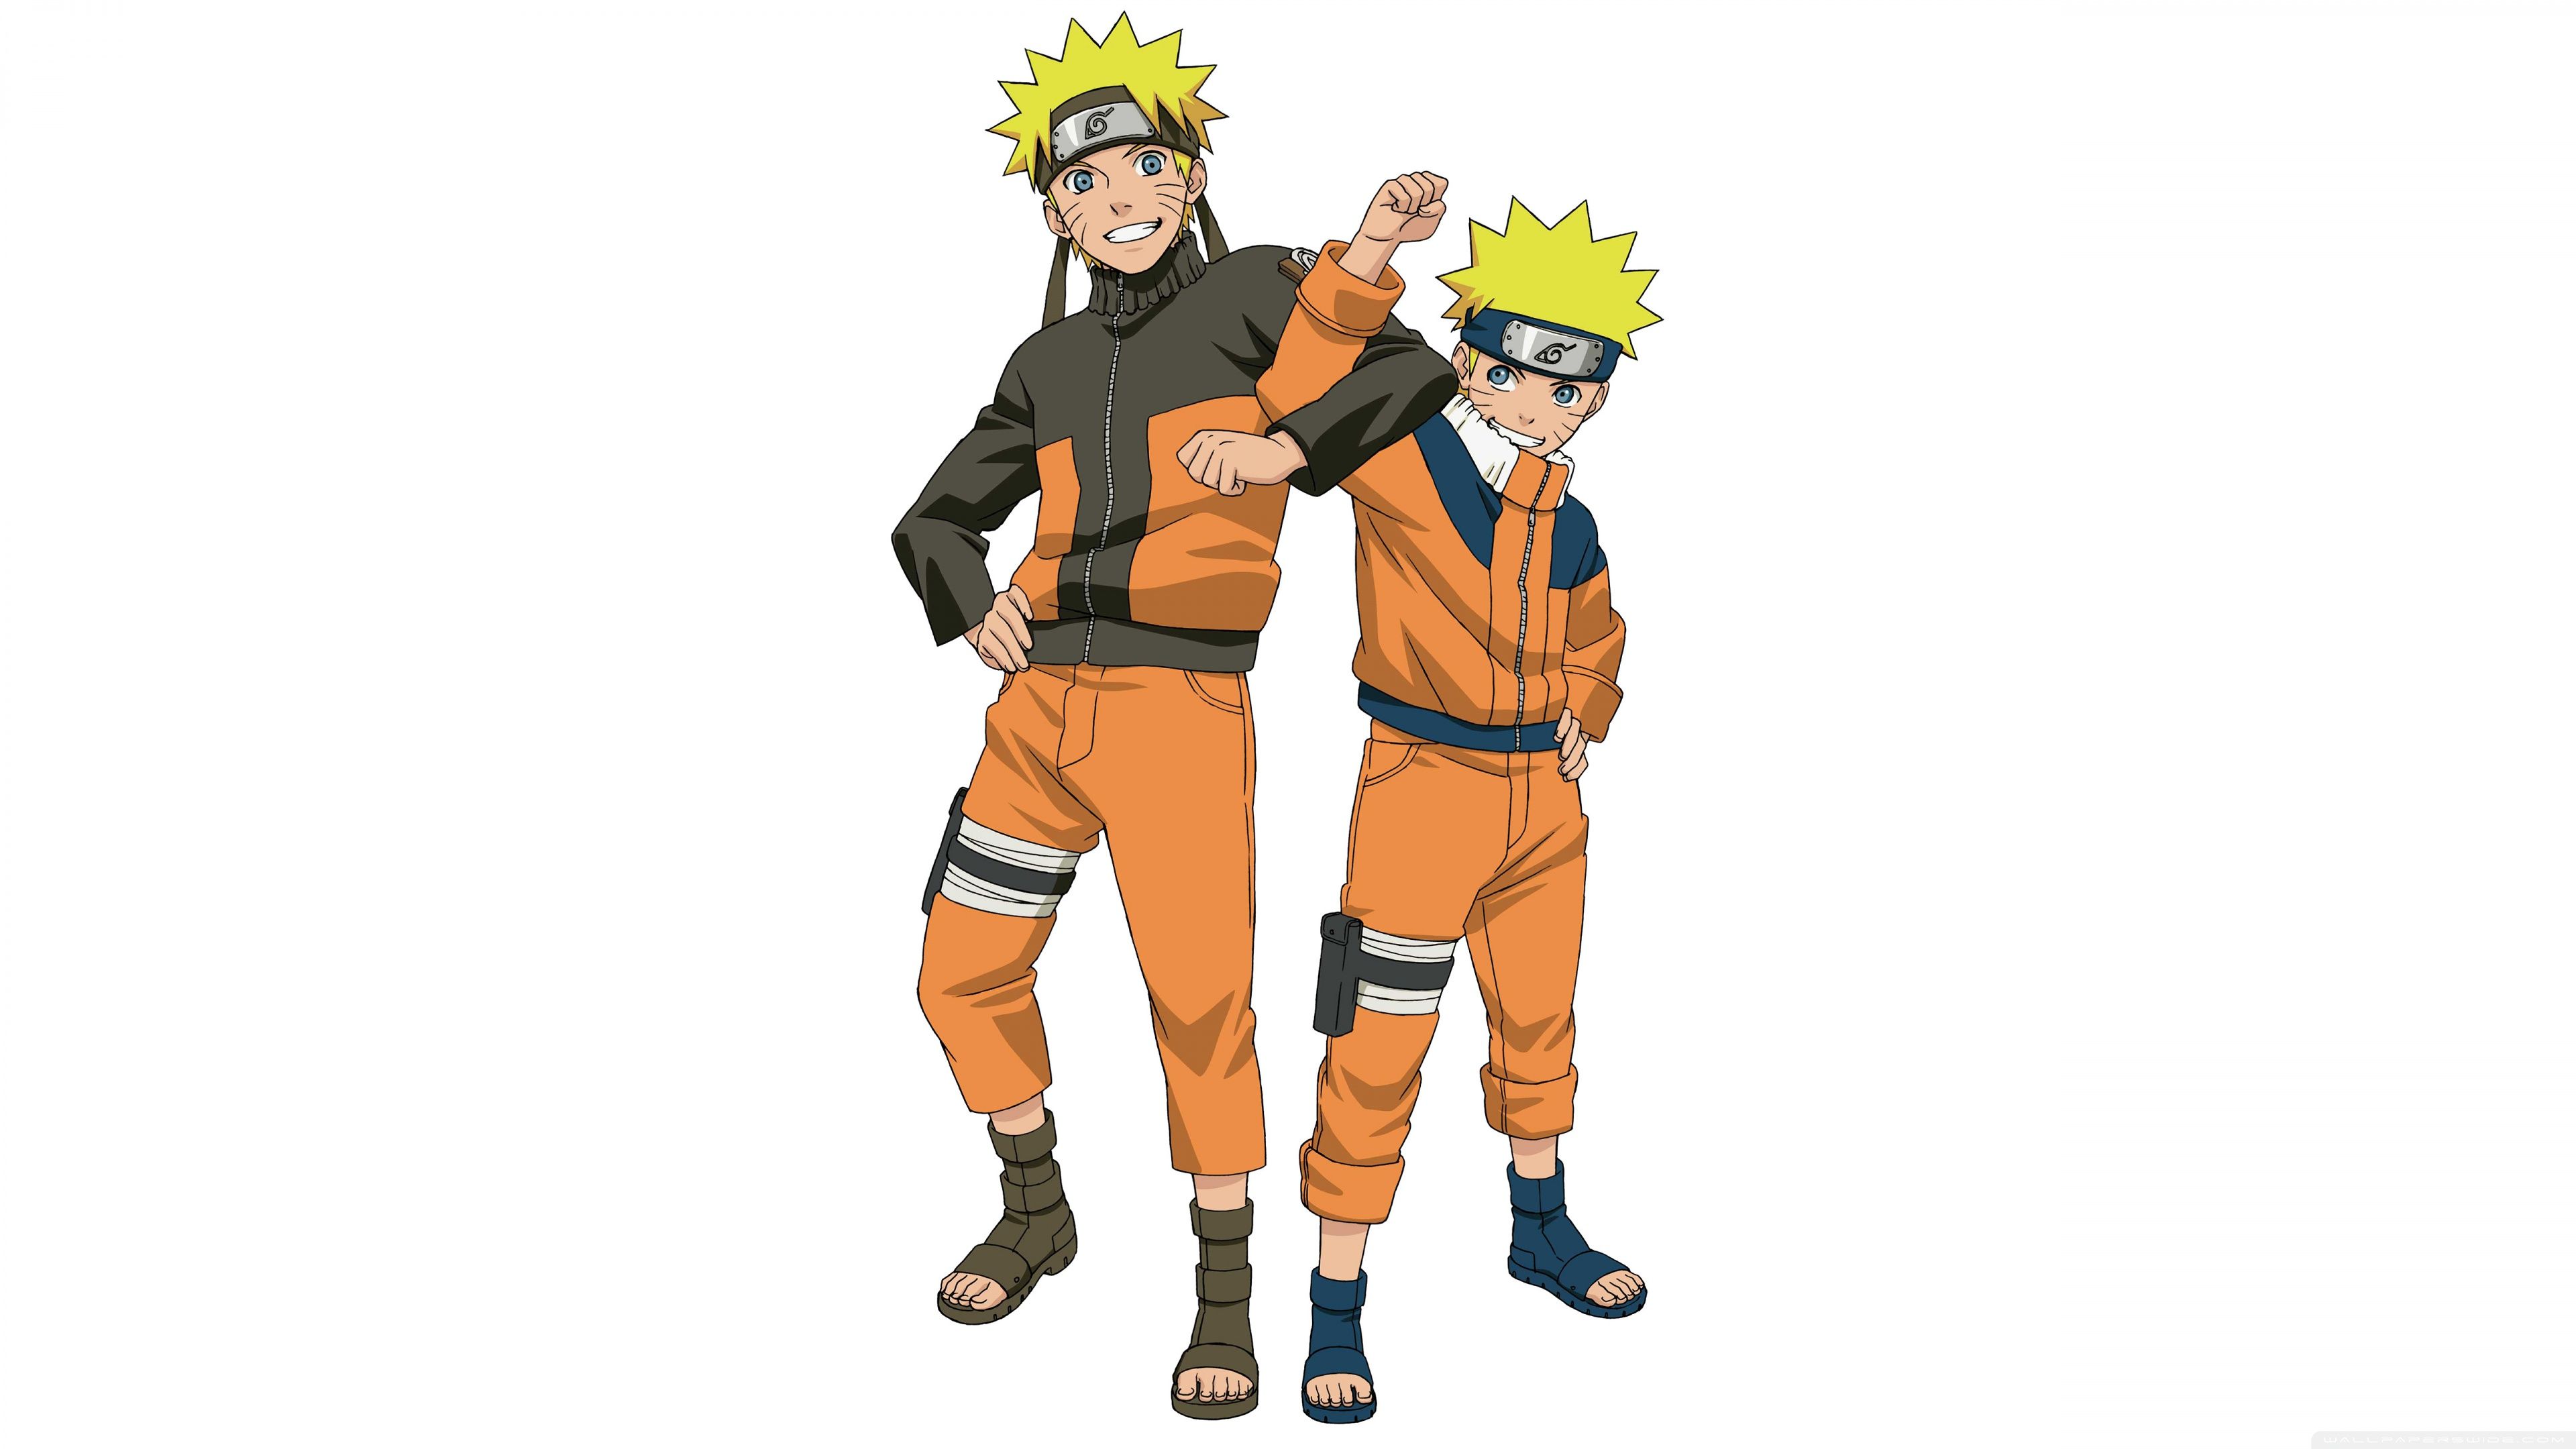 Naruto 4K wallpaper for your desktop or mobile screen free and easy to download